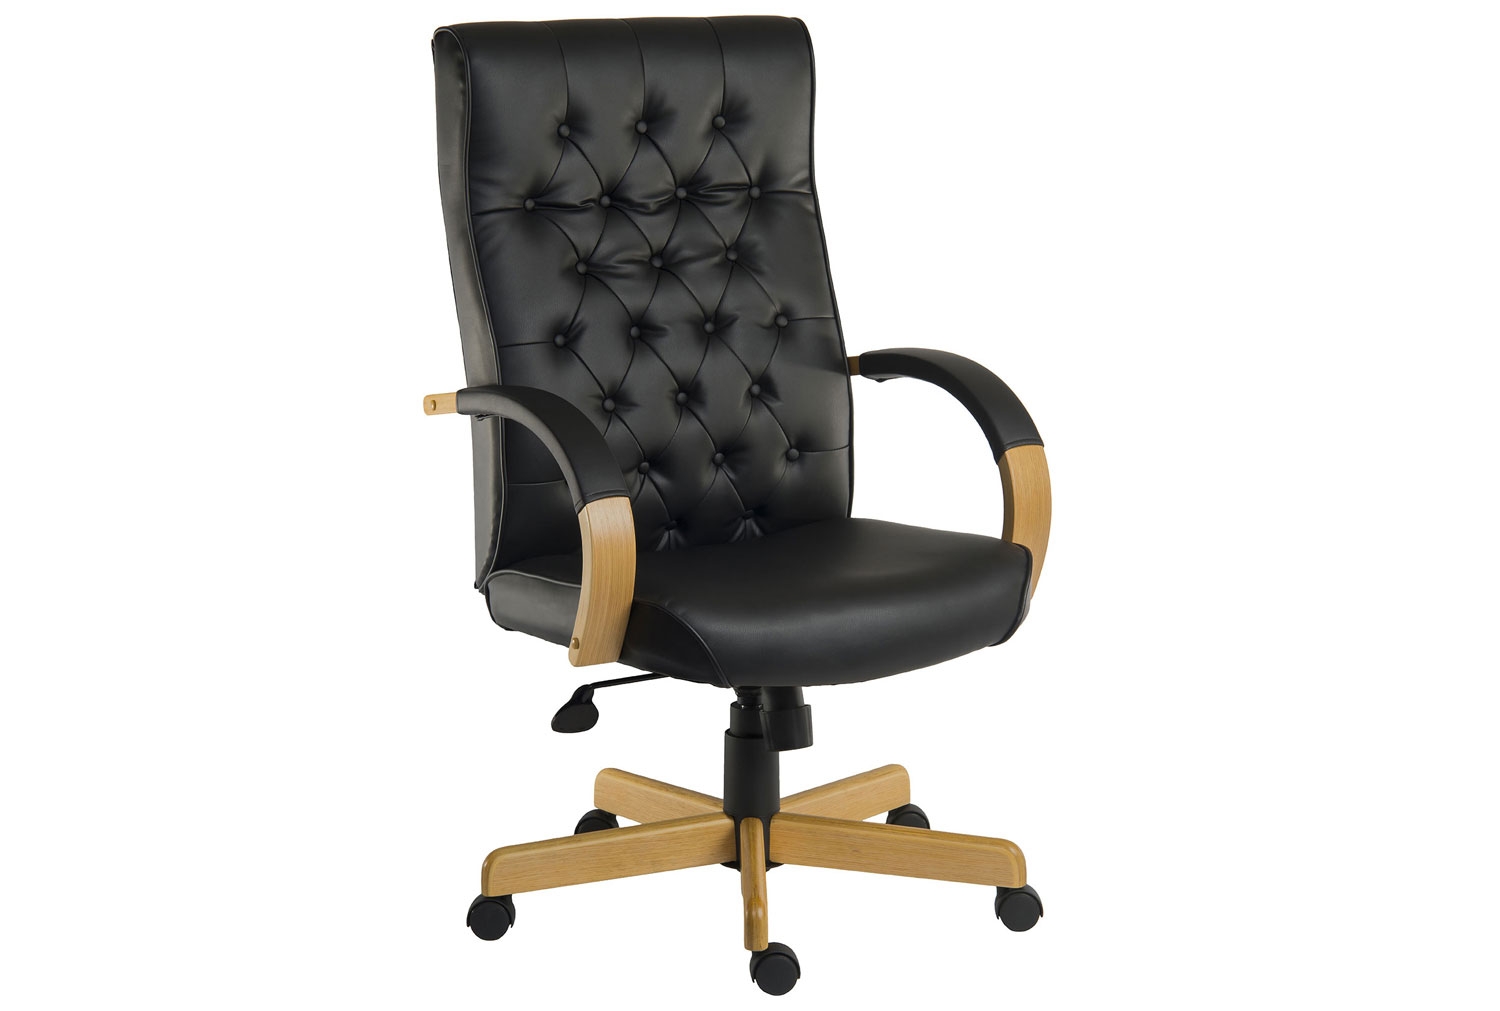 Warwick Leather Faced Executive Office Chair (Black)